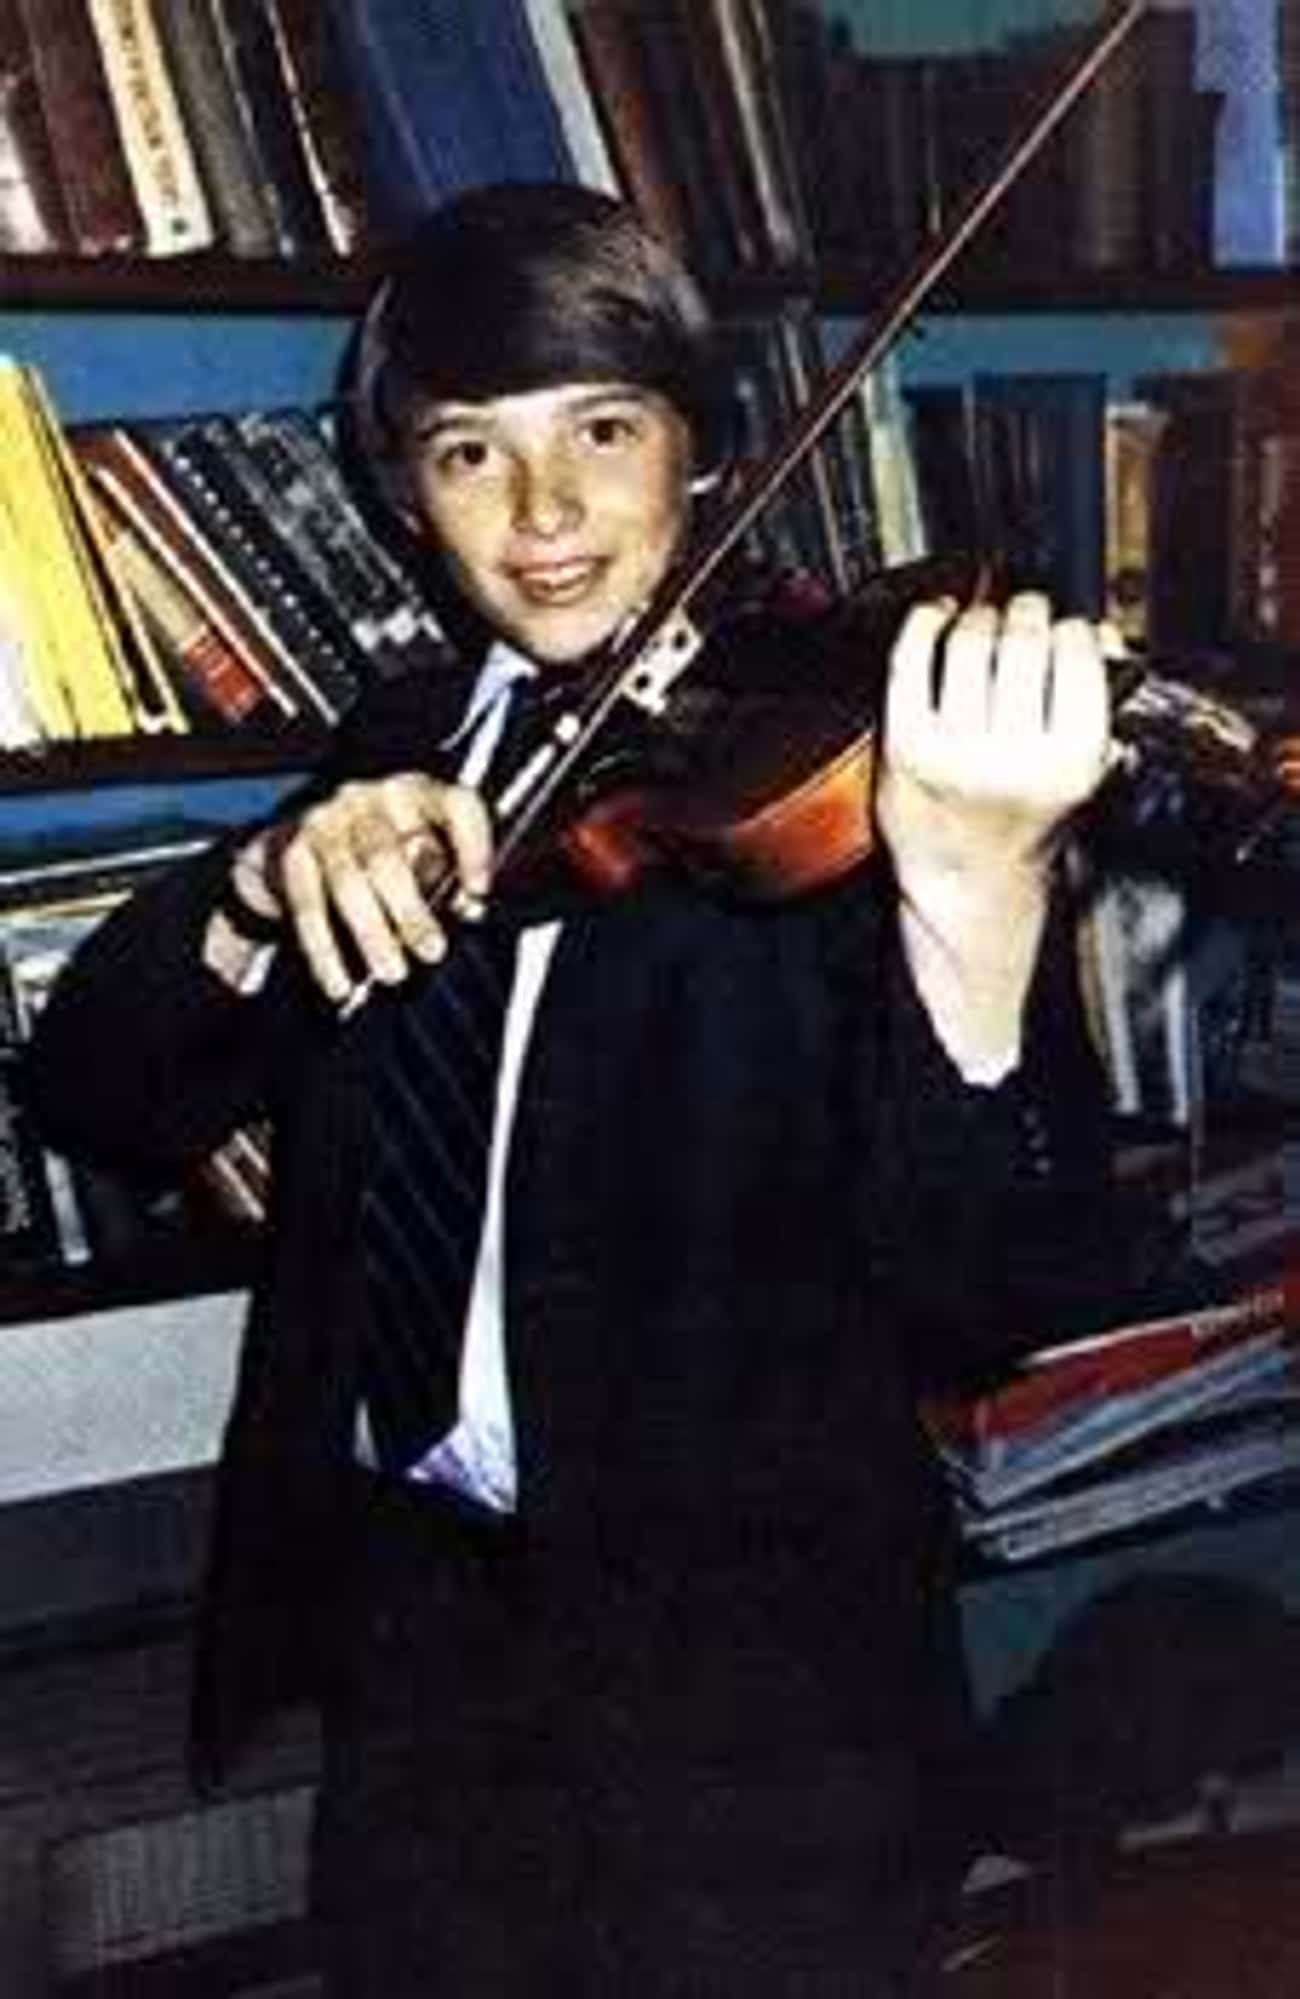 Young Hugh Jackman in a Tuxedo Playing the Violin as a Kid